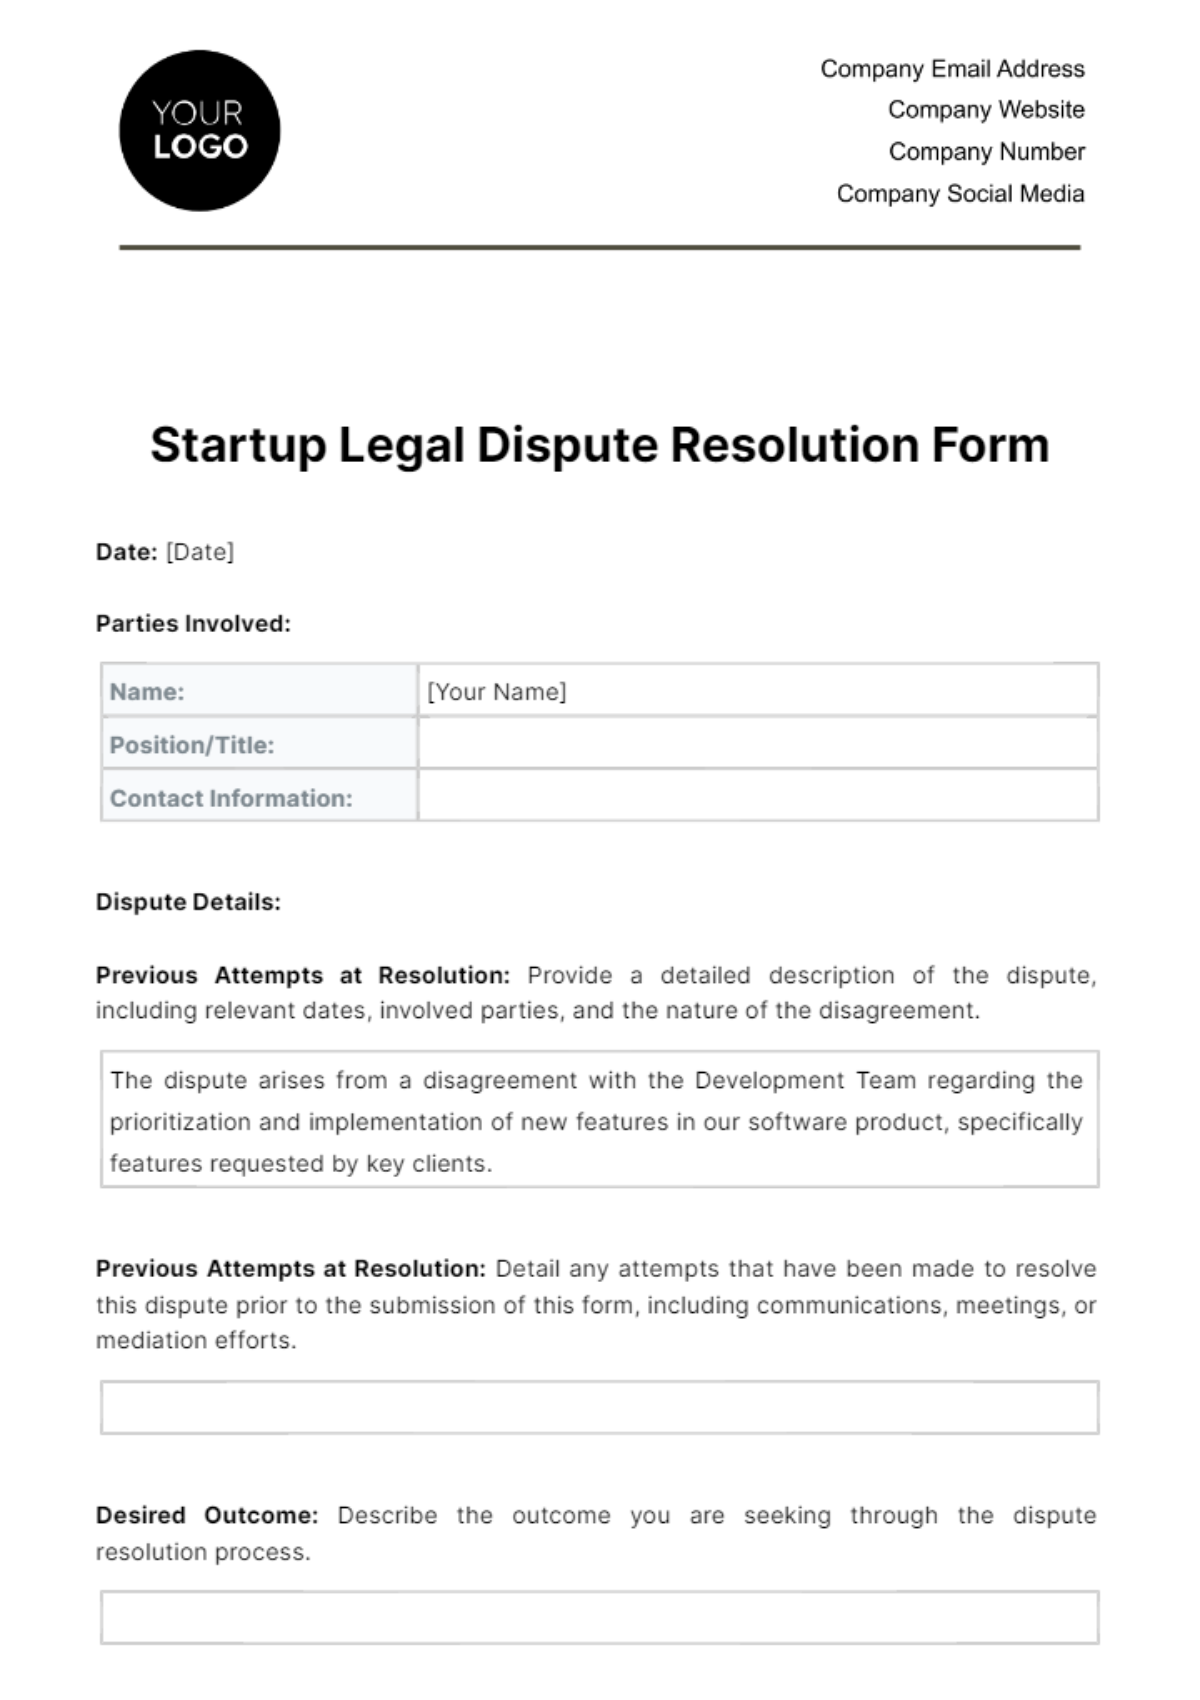 Startup Legal Dispute Resolution Form Template